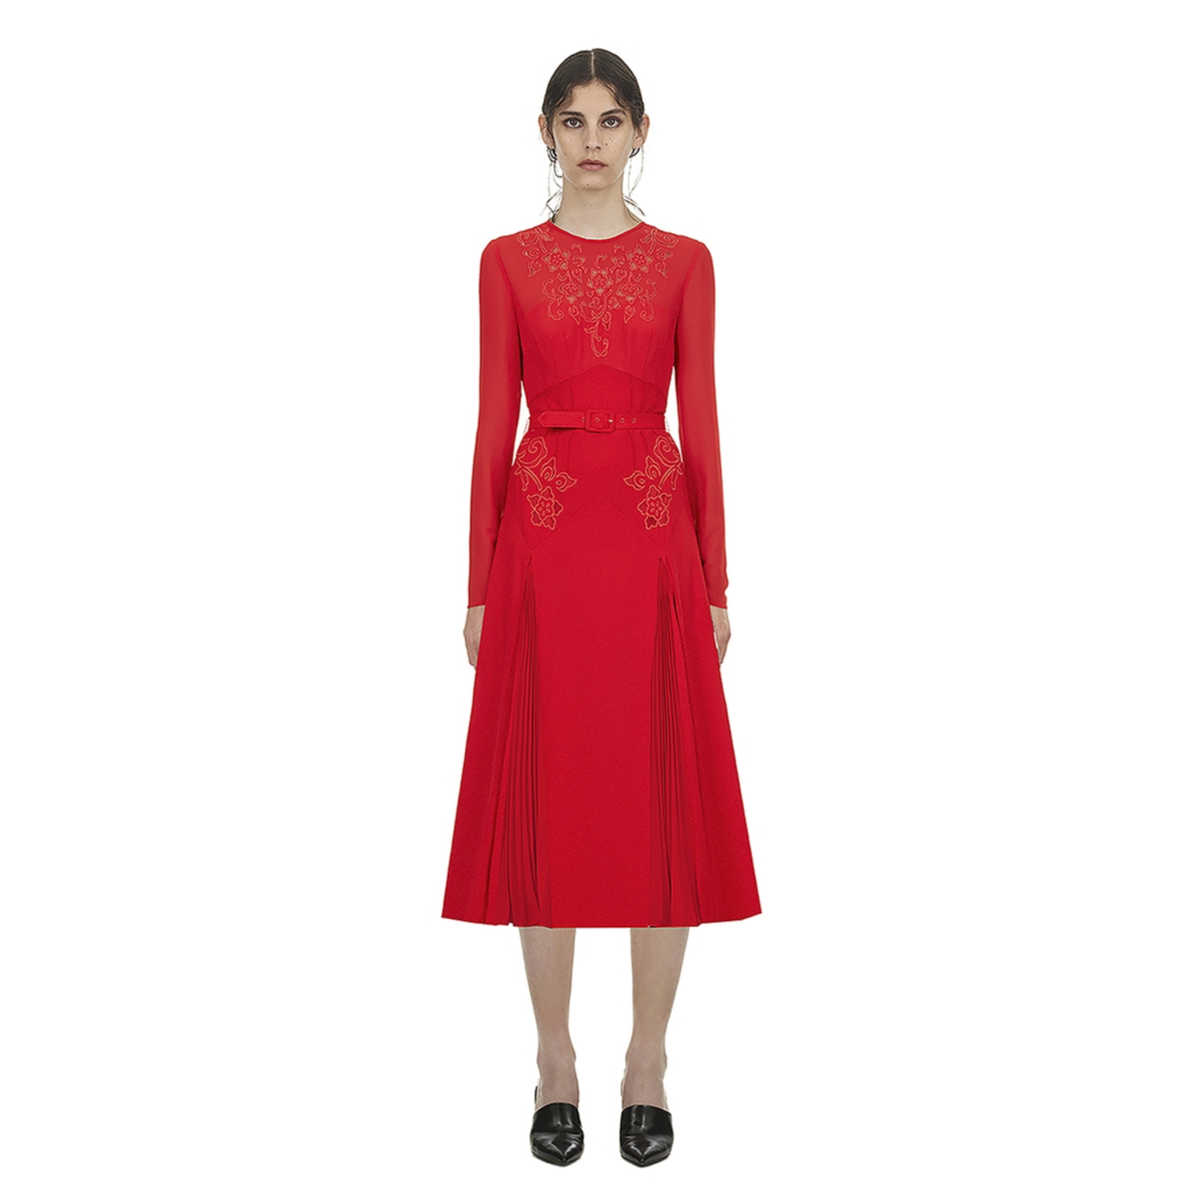 Self-Portrait Red Embroidered Midi Dress - Meghan's Mirror